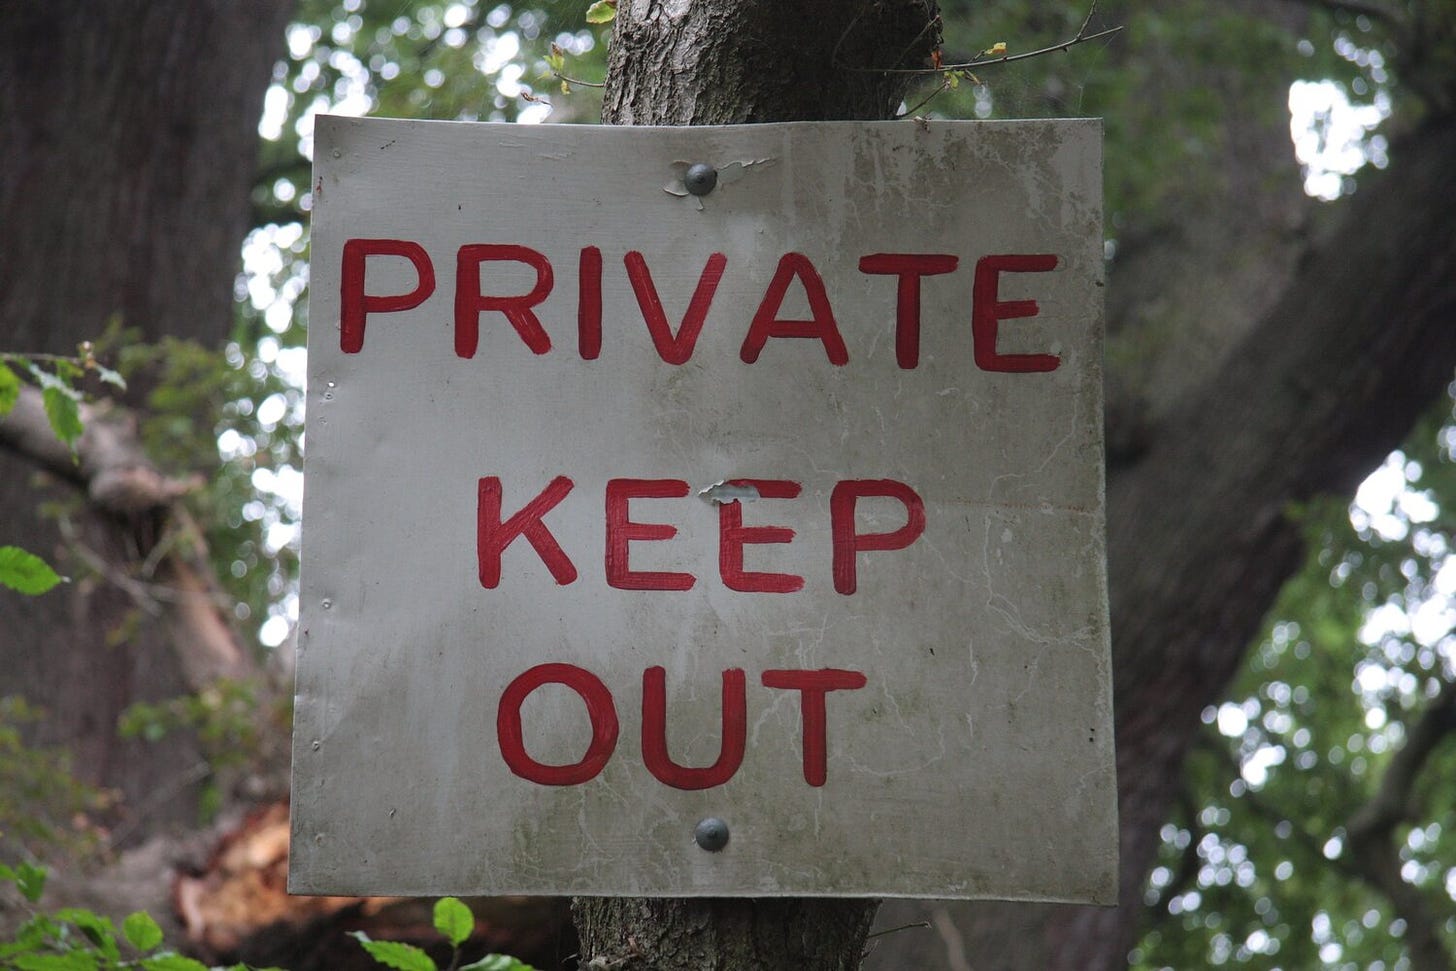 Keep out, by Terry Freedman